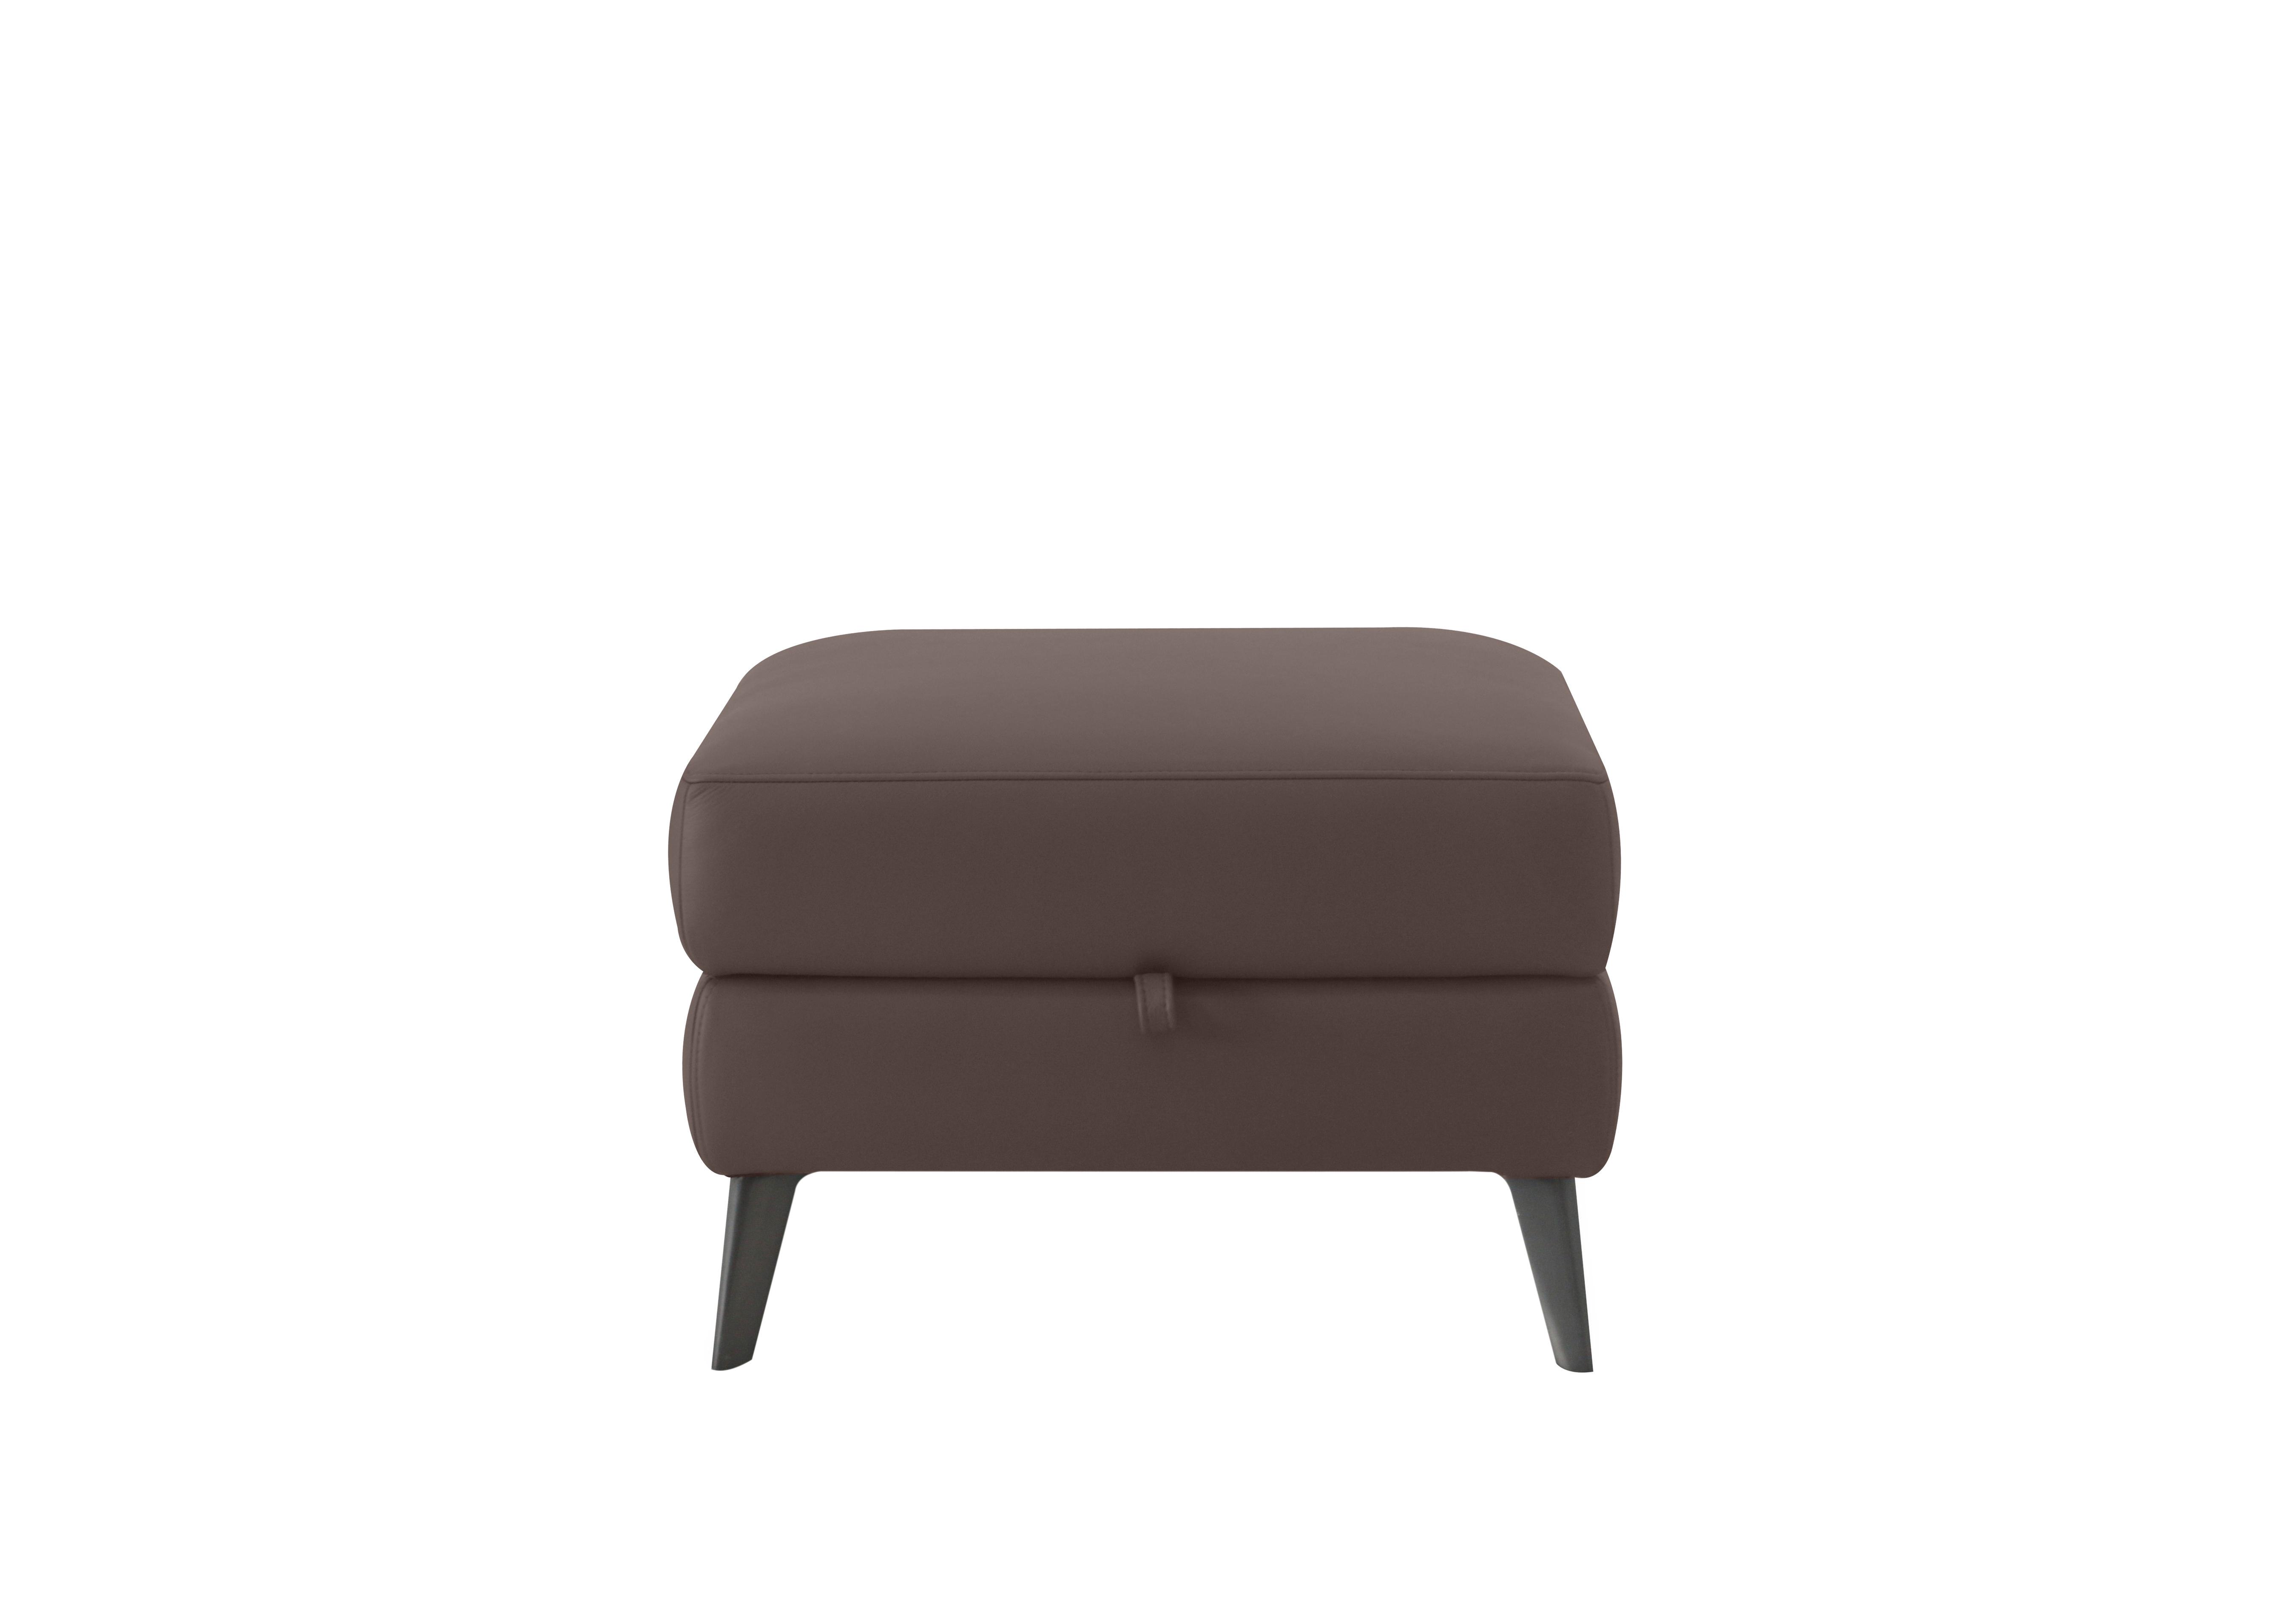 Logan Leather Storage Footstool in Nn-512e Cacao Brown on Furniture Village